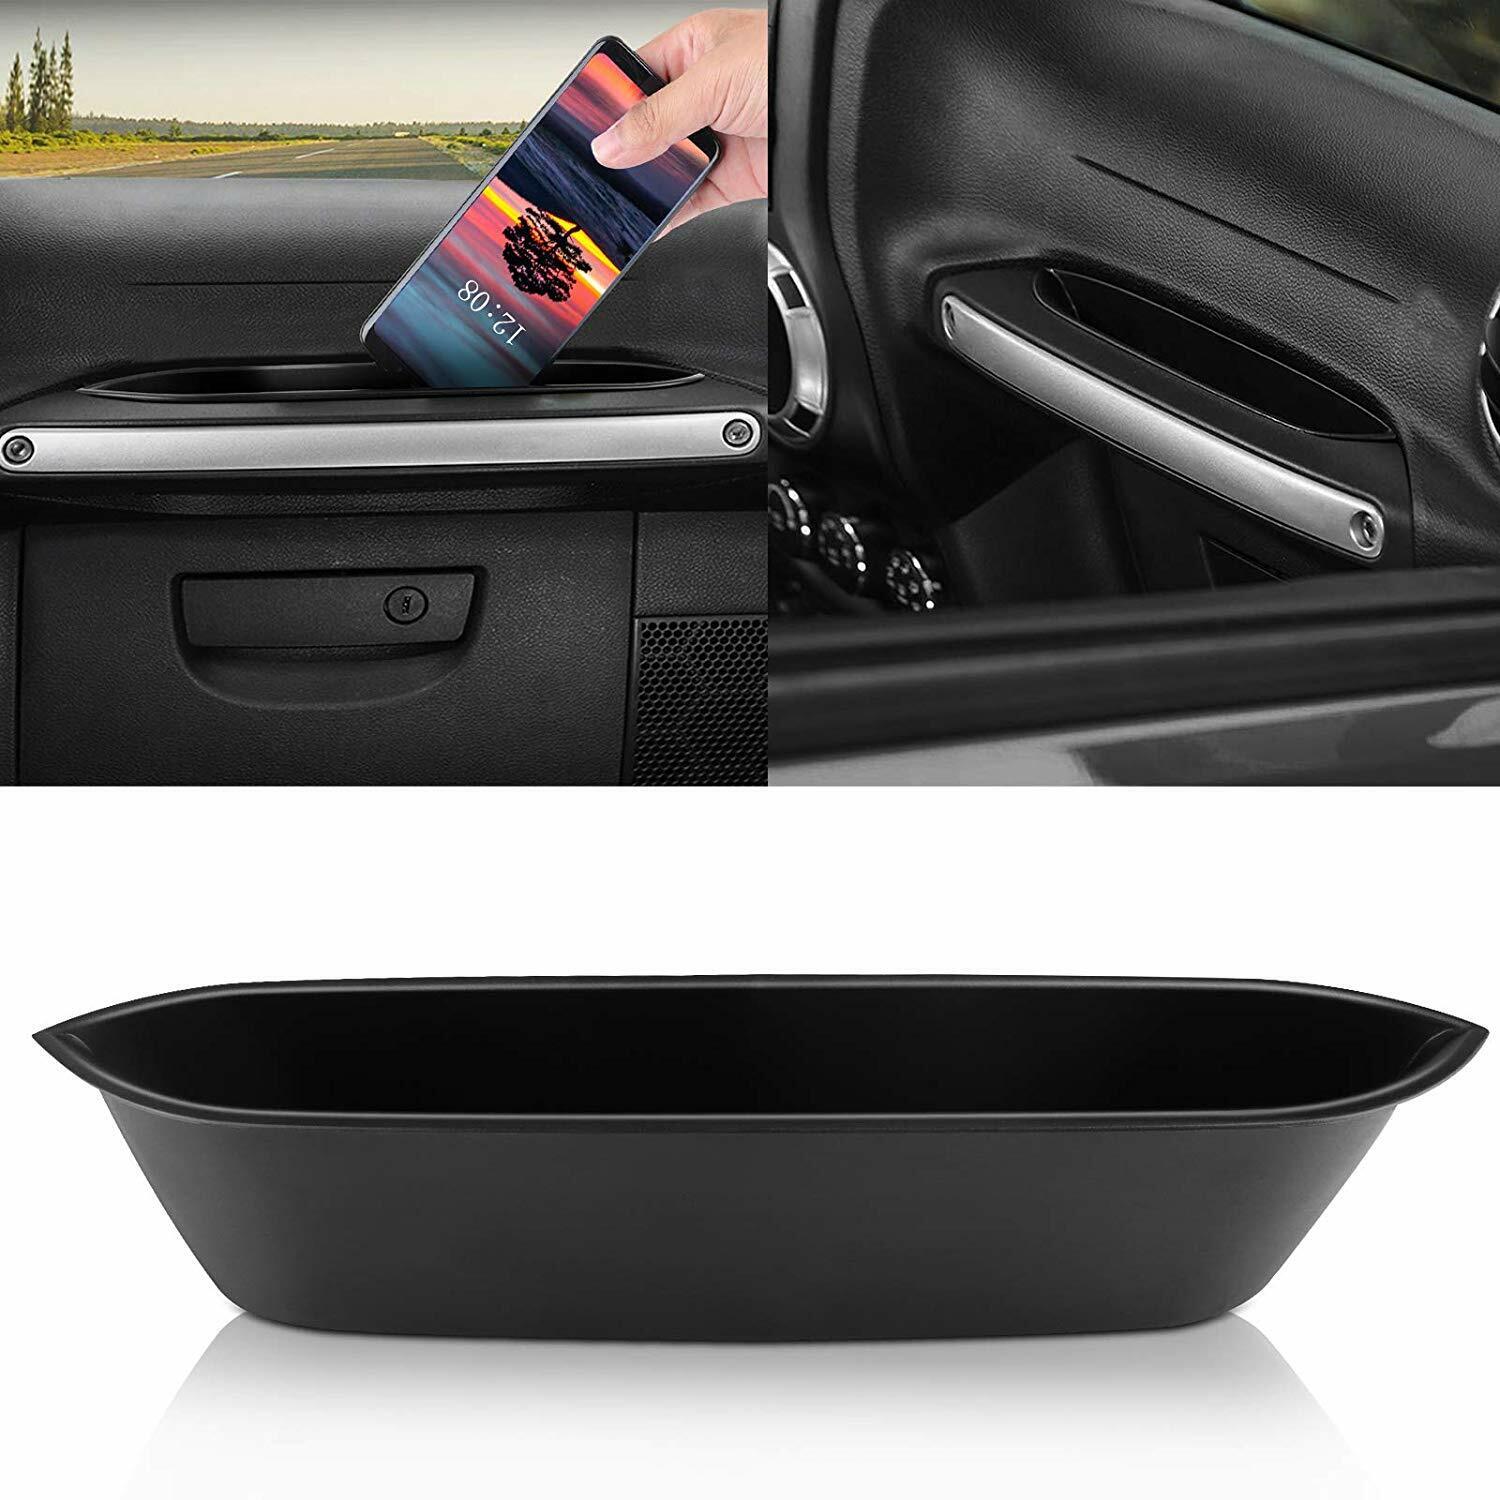 for Jeep JK Passenger Handle Grab Storage Tray Box Fit jeep wrangler accessories